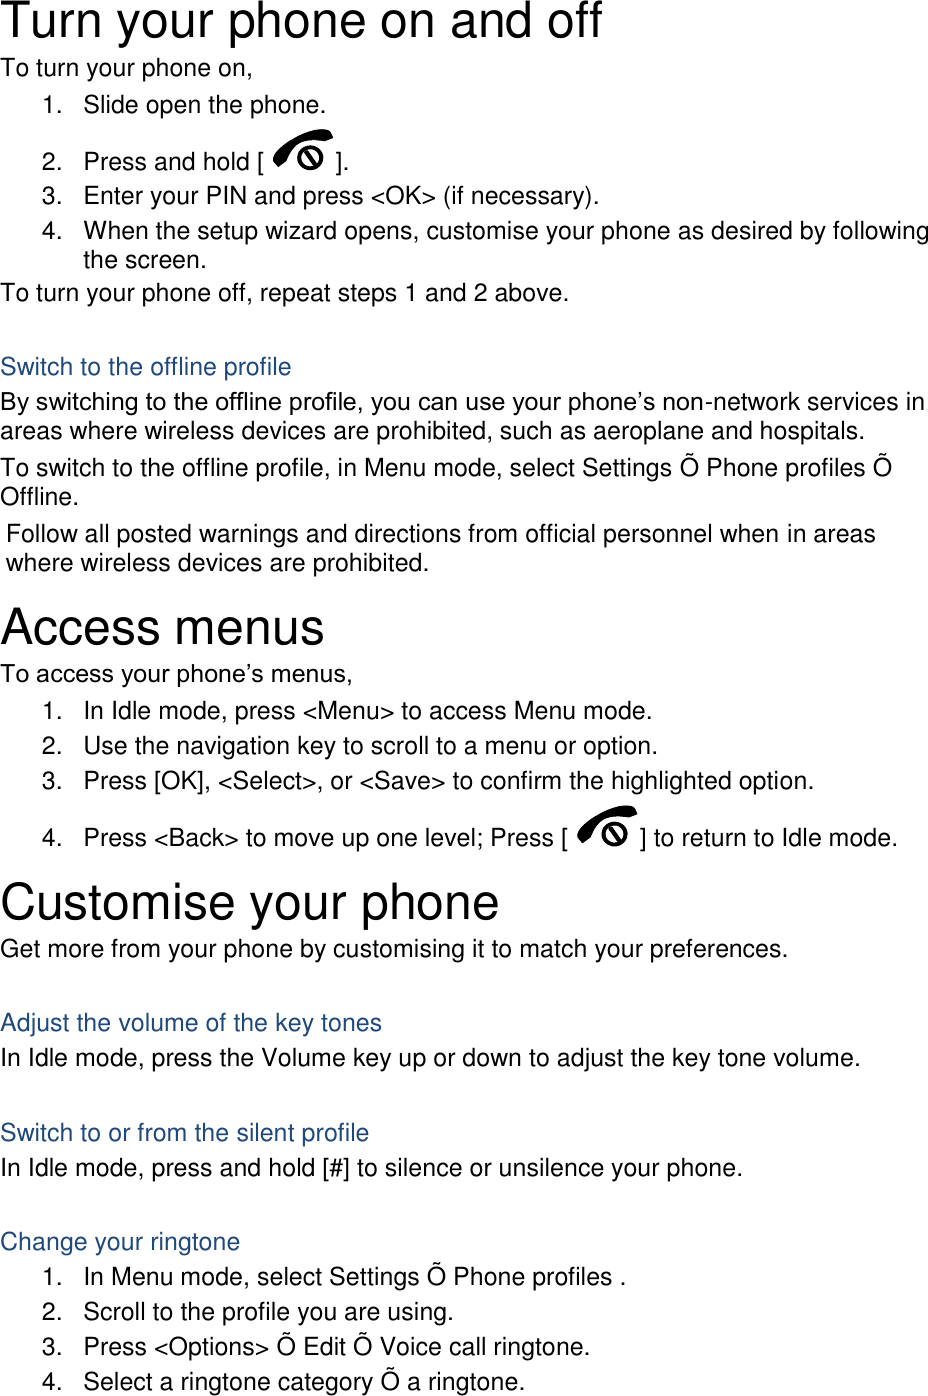 Turn your phone on and off To turn your phone on, 1.  Slide open the phone. 2.  Press and hold [ ]. 3.  Enter your PIN and press &lt;OK&gt; (if necessary). 4.  When the setup wizard opens, customise your phone as desired by following the screen. To turn your phone off, repeat steps 1 and 2 above.  Switch to the offline profile By switching to the offline profile, you can use your phone’s non-network services in areas where wireless devices are prohibited, such as aeroplane and hospitals. To switch to the offline profile, in Menu mode, select Settings Õ  Phone profiles Õ  Offline. Follow all posted warnings and directions from official personnel when in areas where wireless devices are prohibited. Access menus To access your phone’s menus, 1.  In Idle mode, press &lt;Menu&gt; to access Menu mode. 2.  Use the navigation key to scroll to a menu or option. 3.  Press [OK], &lt;Select&gt;, or &lt;Save&gt; to confirm the highlighted option. 4.  Press &lt;Back&gt; to move up one level; Press [ ] to return to Idle mode. Customise your phone Get more from your phone by customising it to match your preferences.  Adjust the volume of the key tones In Idle mode, press the Volume key up or down to adjust the key tone volume.  Switch to or from the silent profile In Idle mode, press and hold [#] to silence or unsilence your phone.  Change your ringtone 1.  In Menu mode, select Settings Õ  Phone profiles . 2.  Scroll to the profile you are using. 3.  Press &lt;Options&gt; Õ  Edit Õ  Voice call ringtone. 4.  Select a ringtone category Õ  a ringtone. 